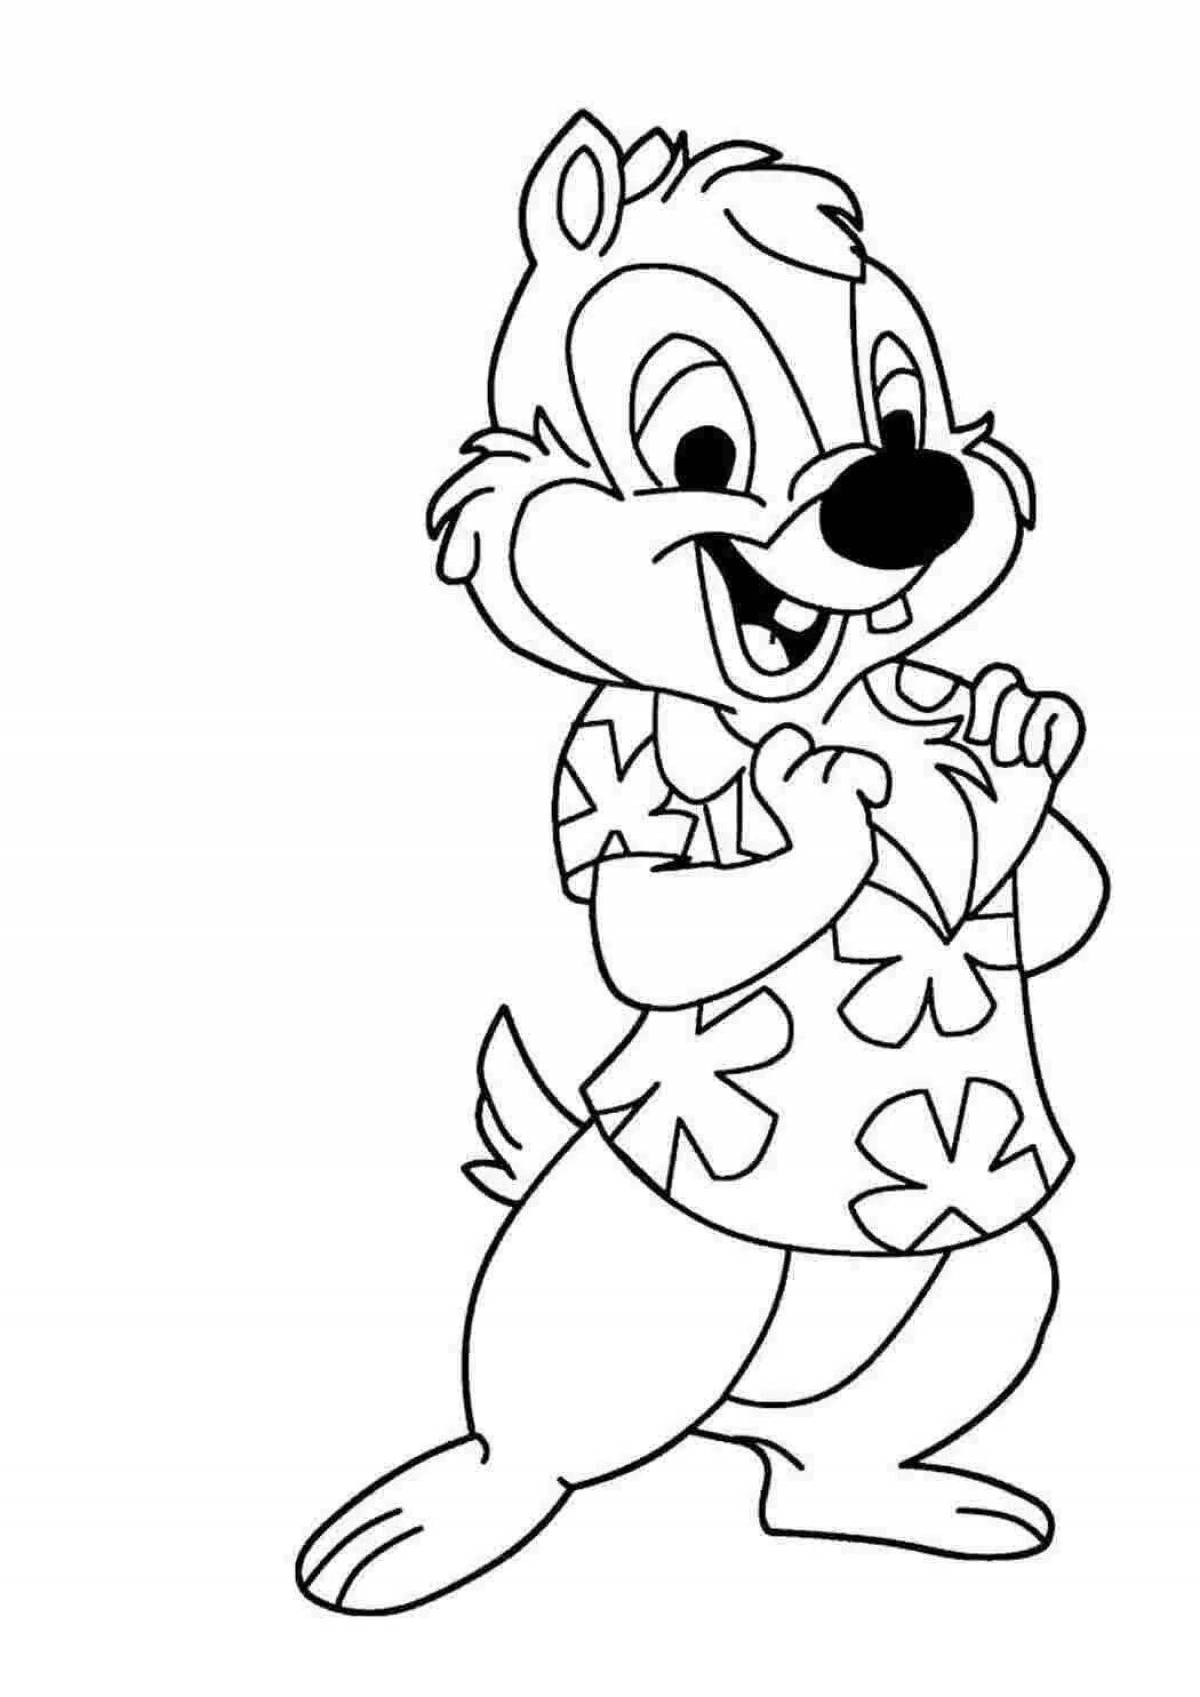 Chip and Dale Rescuers coloring page